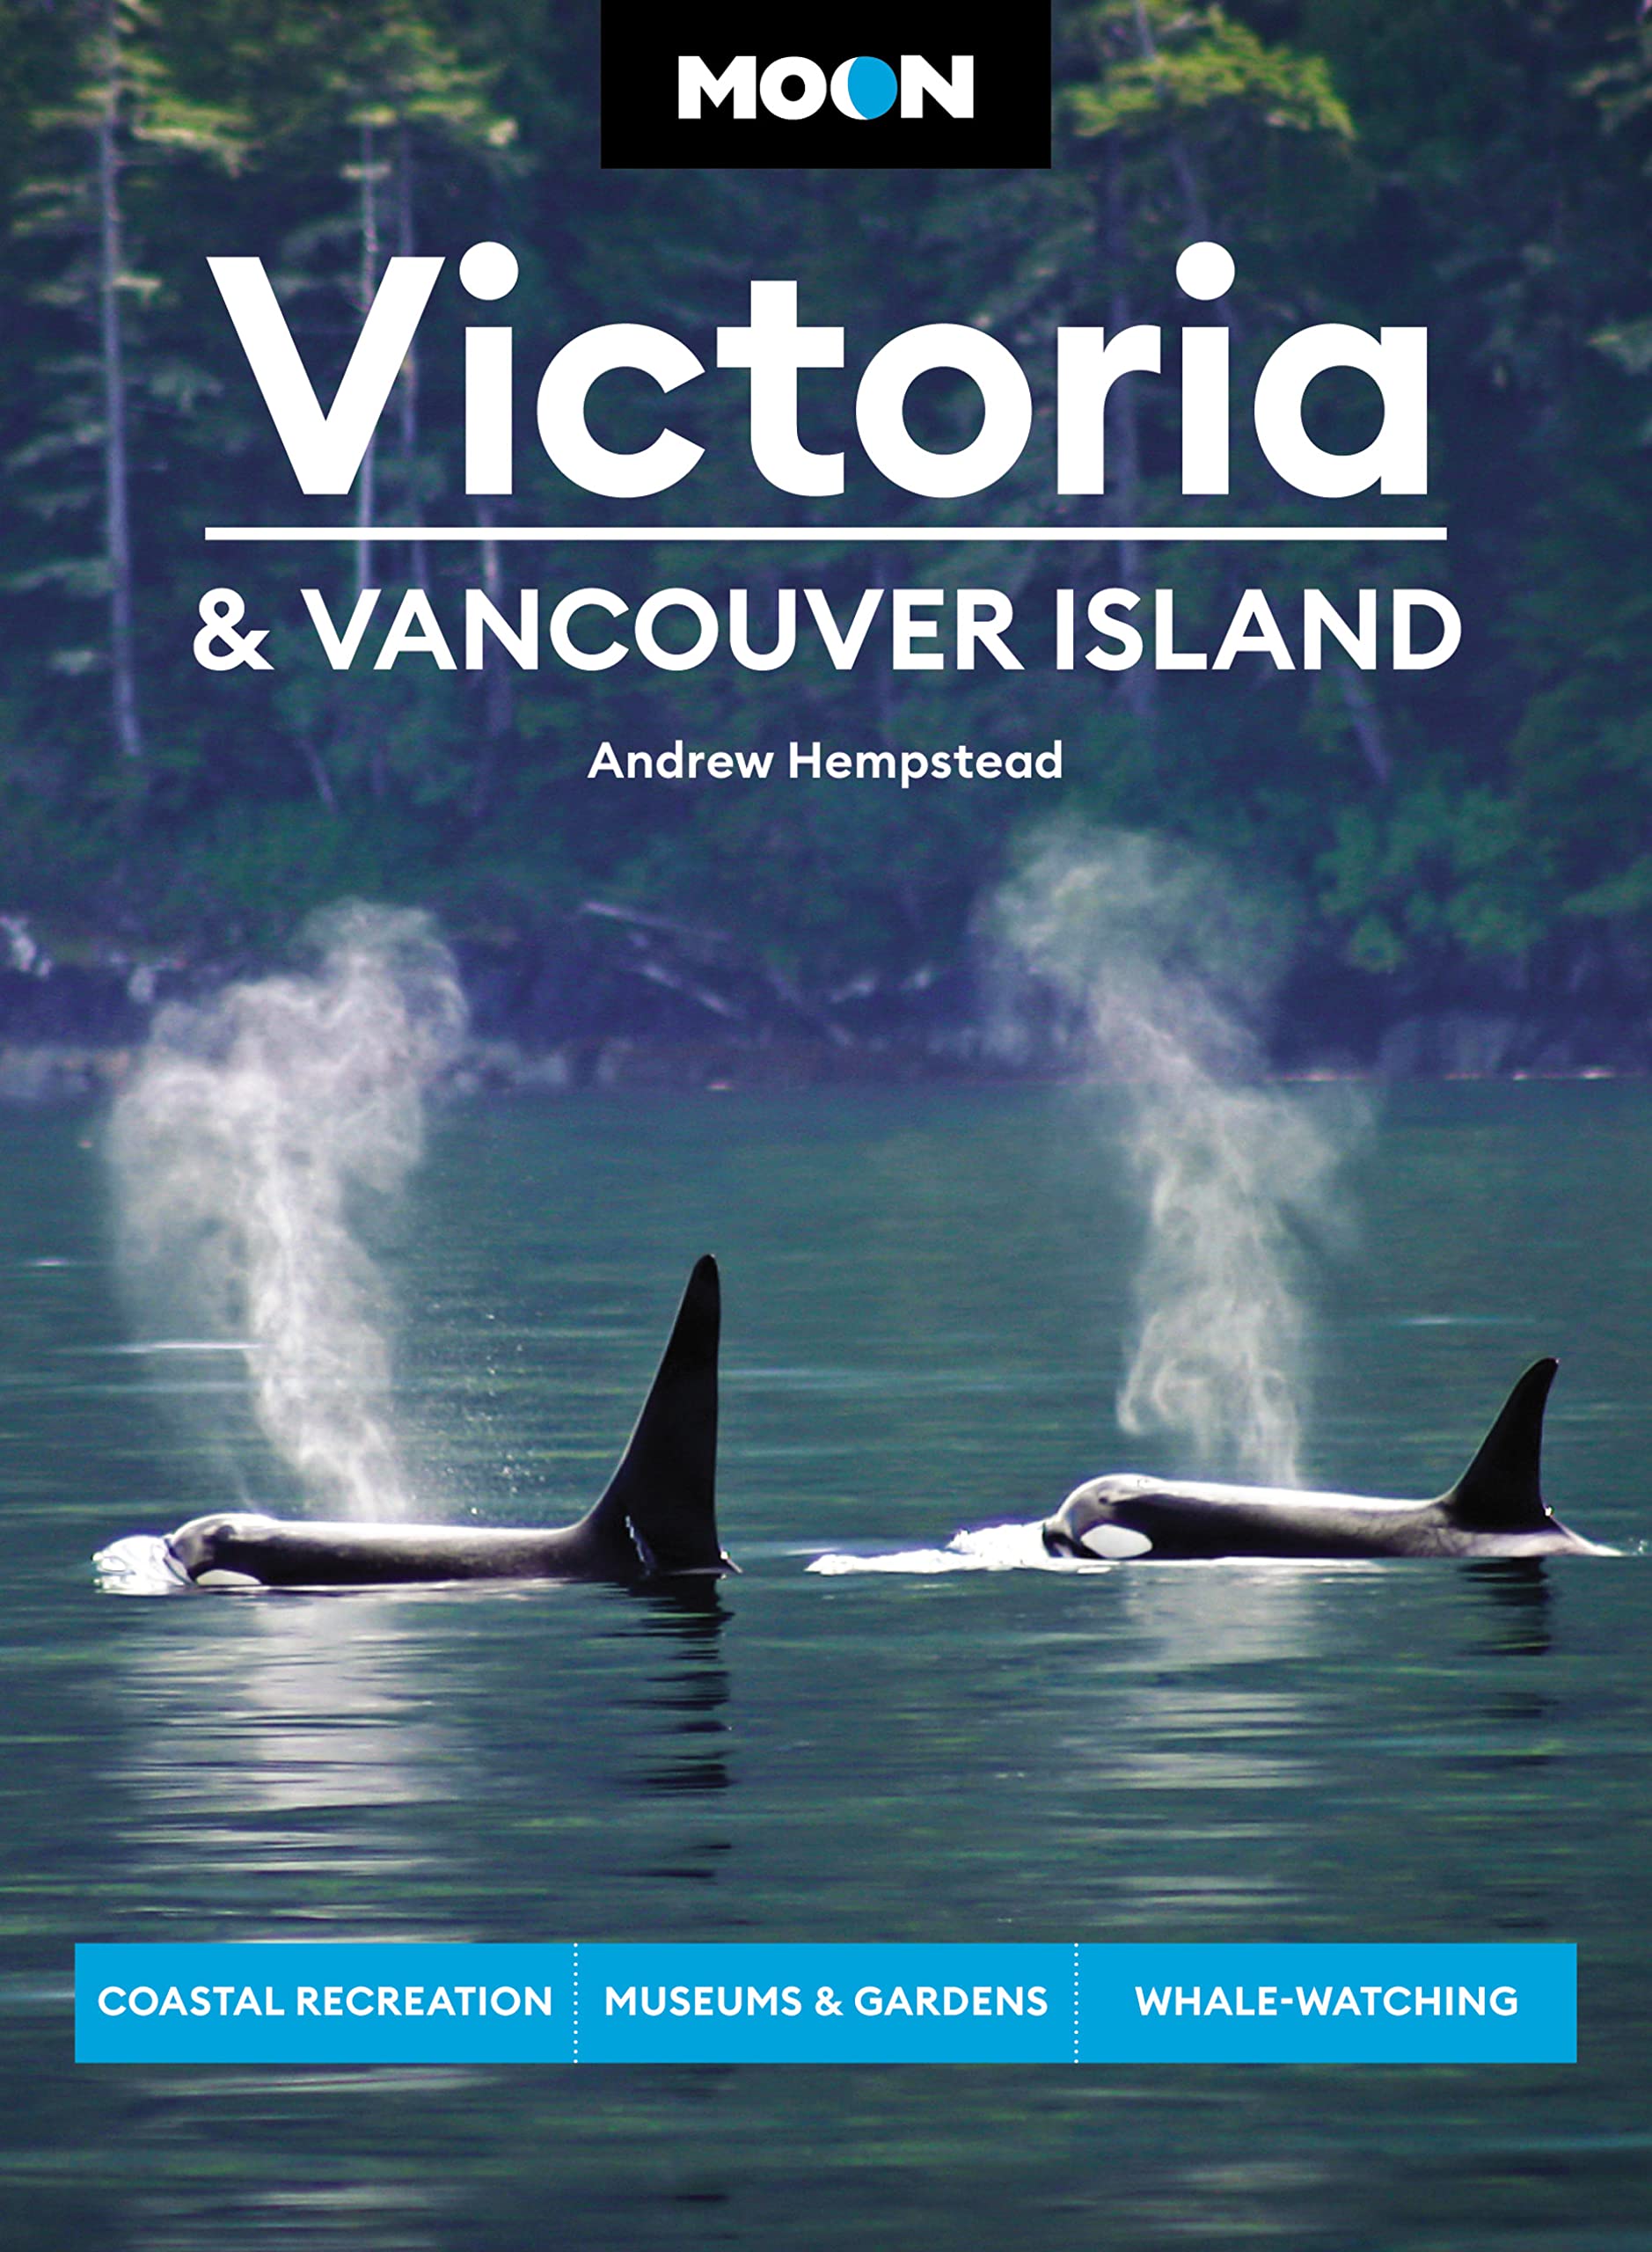 Moon Victoria & Vancouver Island: Coastal Recreation, Museums & Gardens, Whale-Watching (Travel Guide)